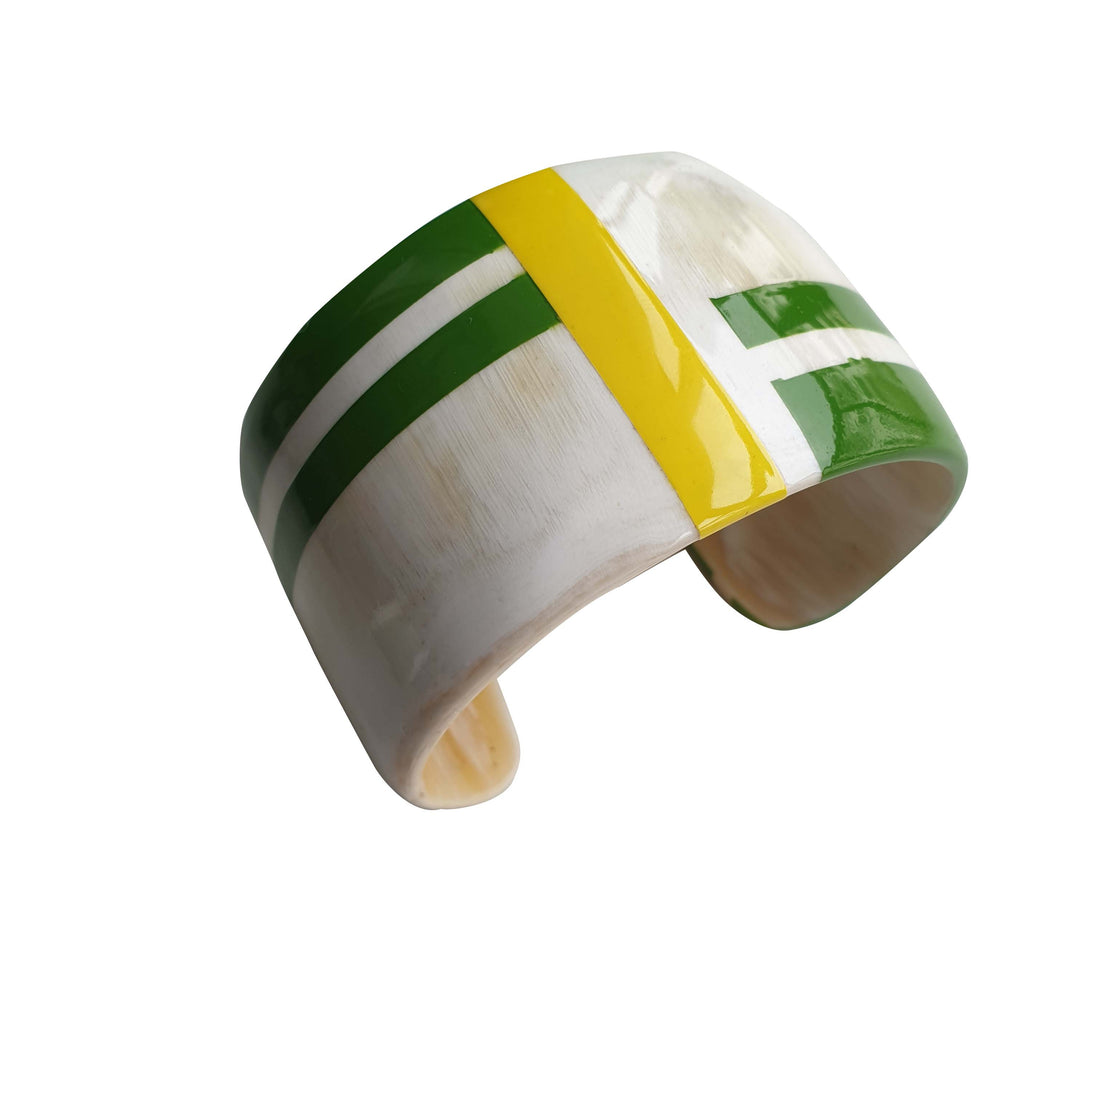 Bright horn jewelry cuff bracelet features white, green, and yellow